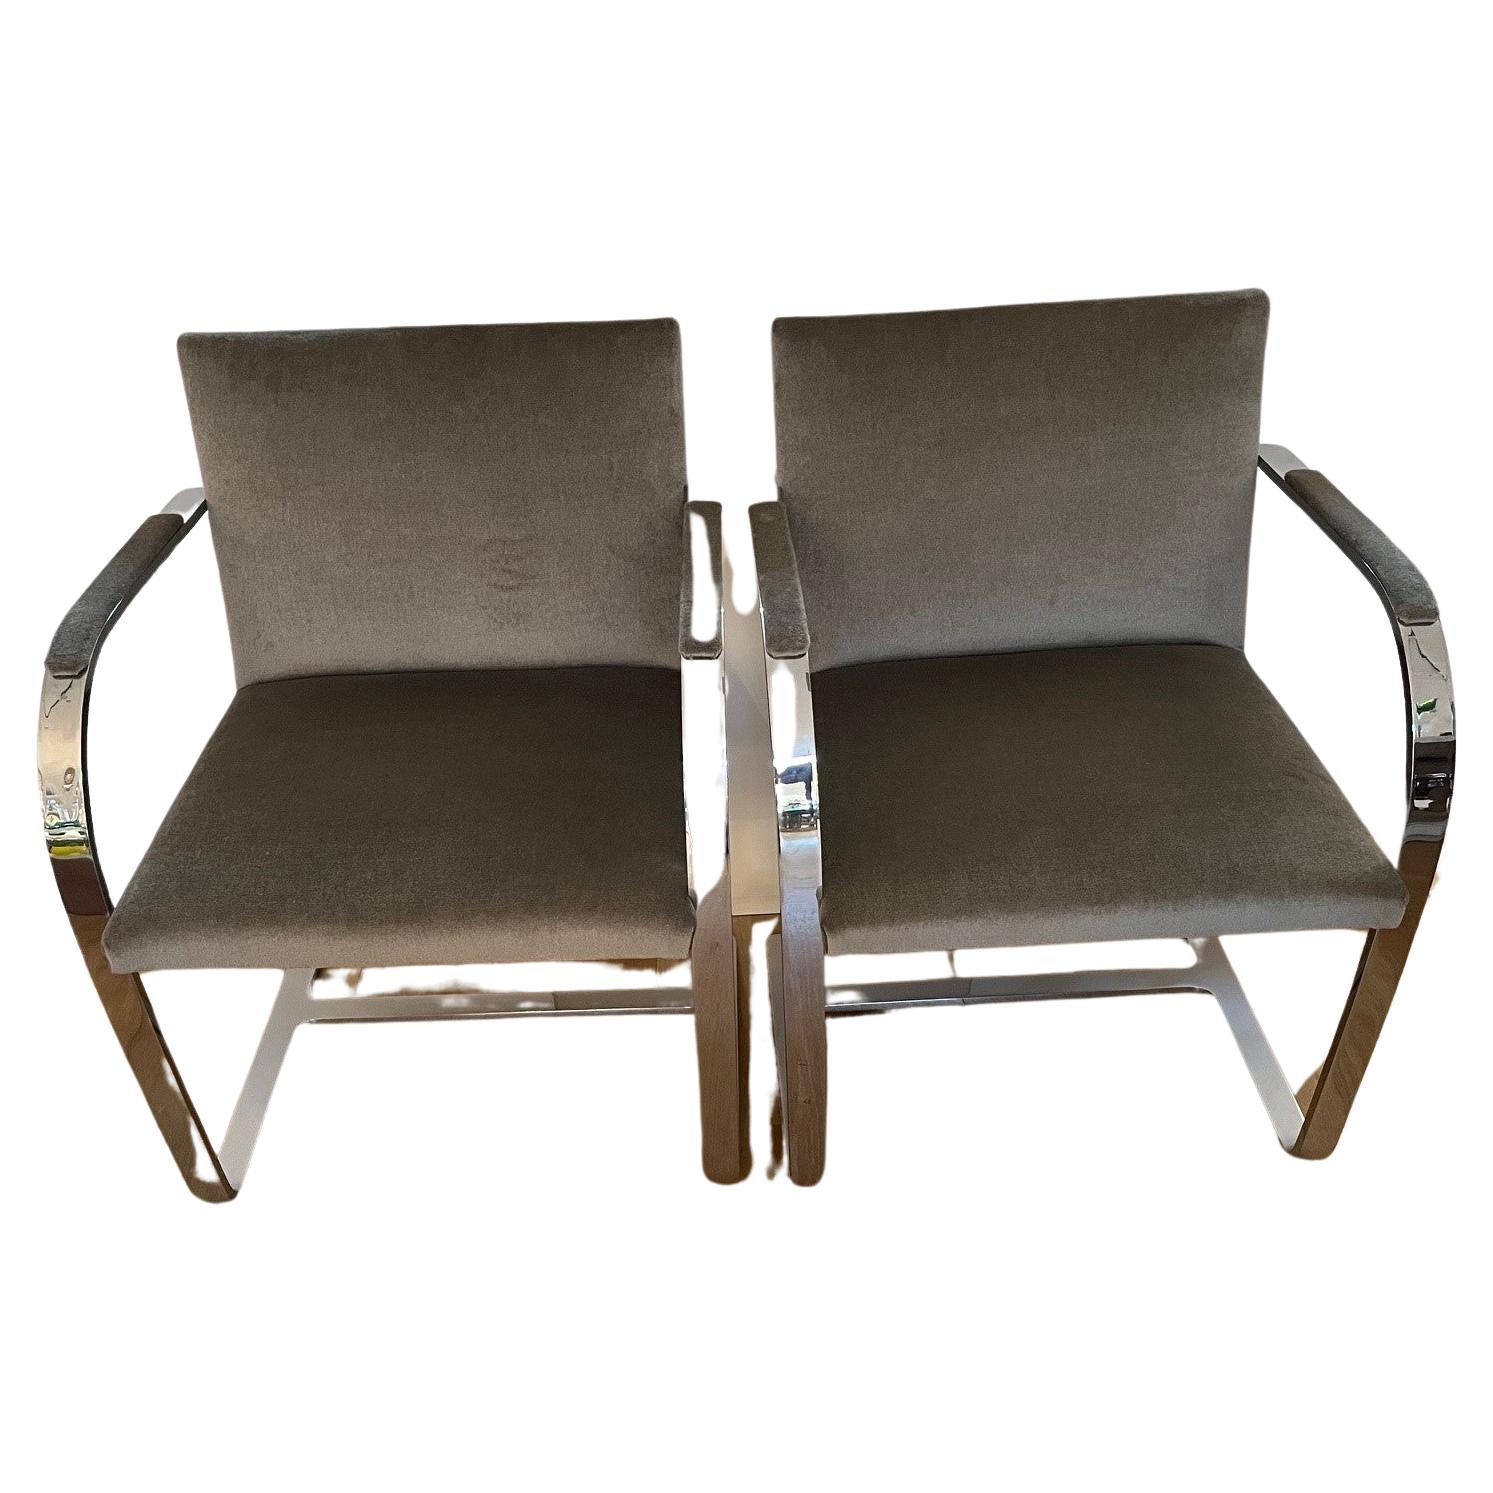 Vintage Pair of Knoll Brno Flat Bar Chairs by Ludwig Mies Van Der Rohe  For Sale